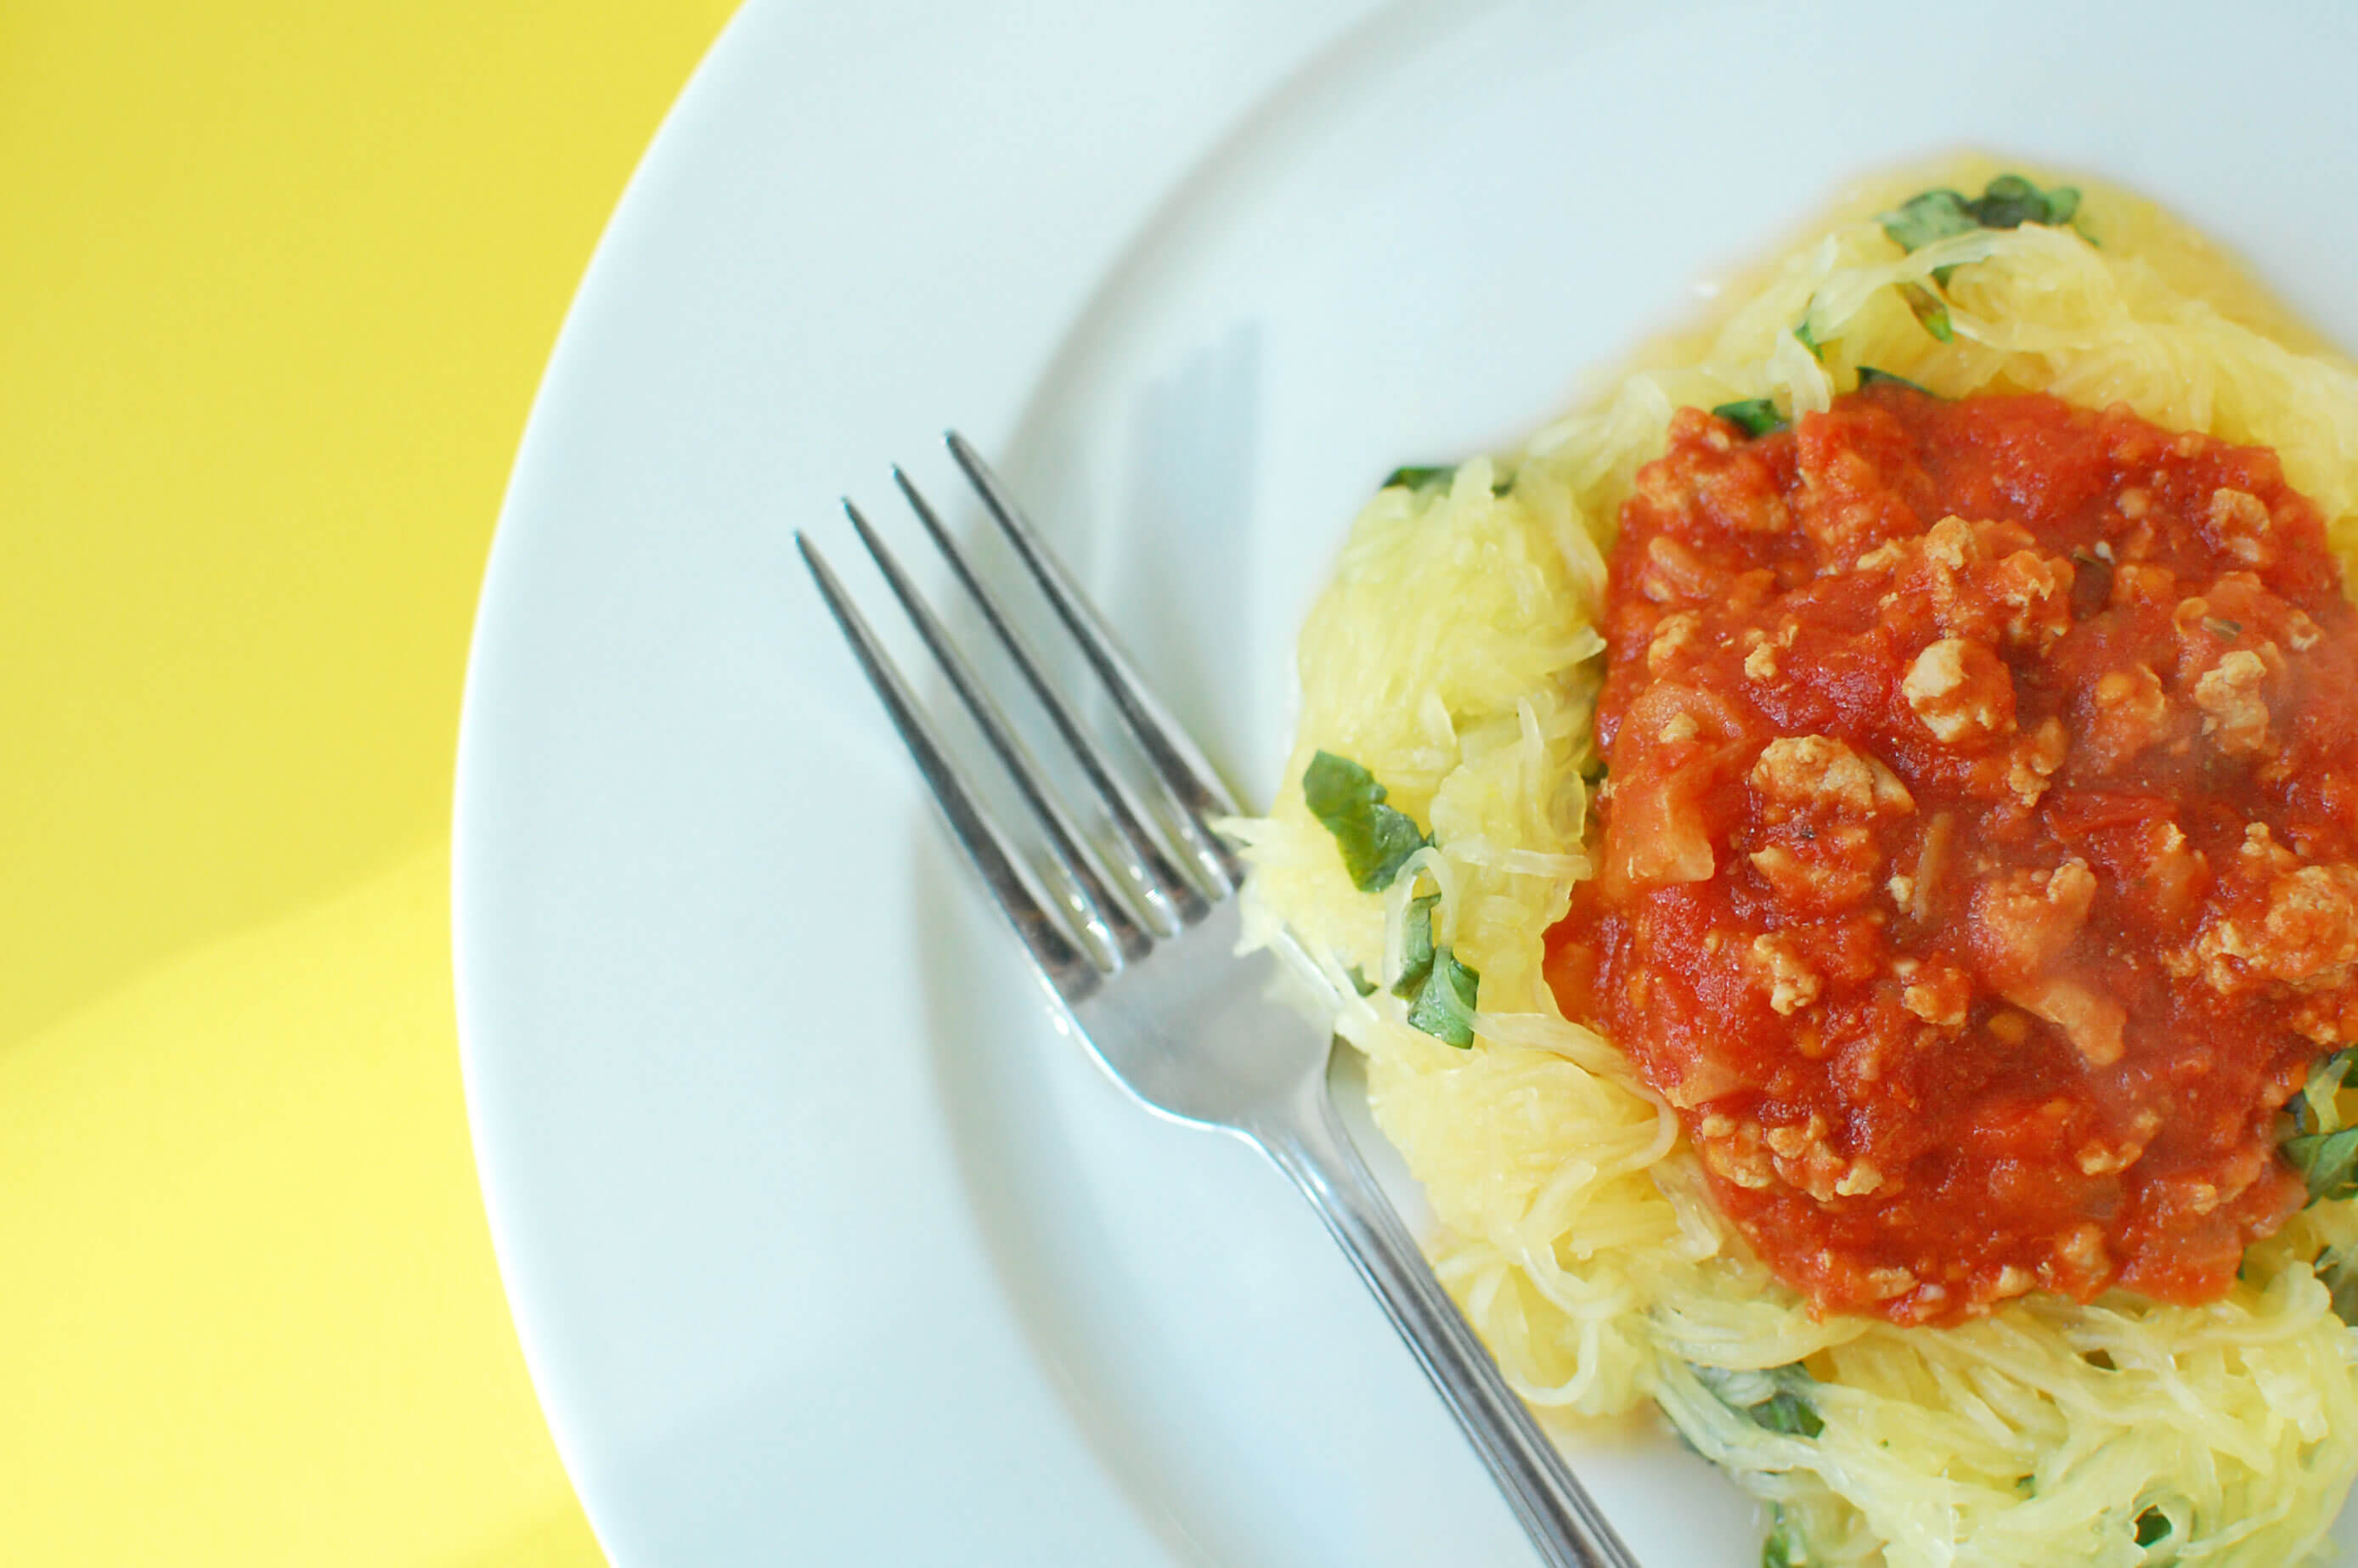 20 Meal Ideas to Help Clients with Eczema: Slow Cooker Bolognese with Spaghetti Squash